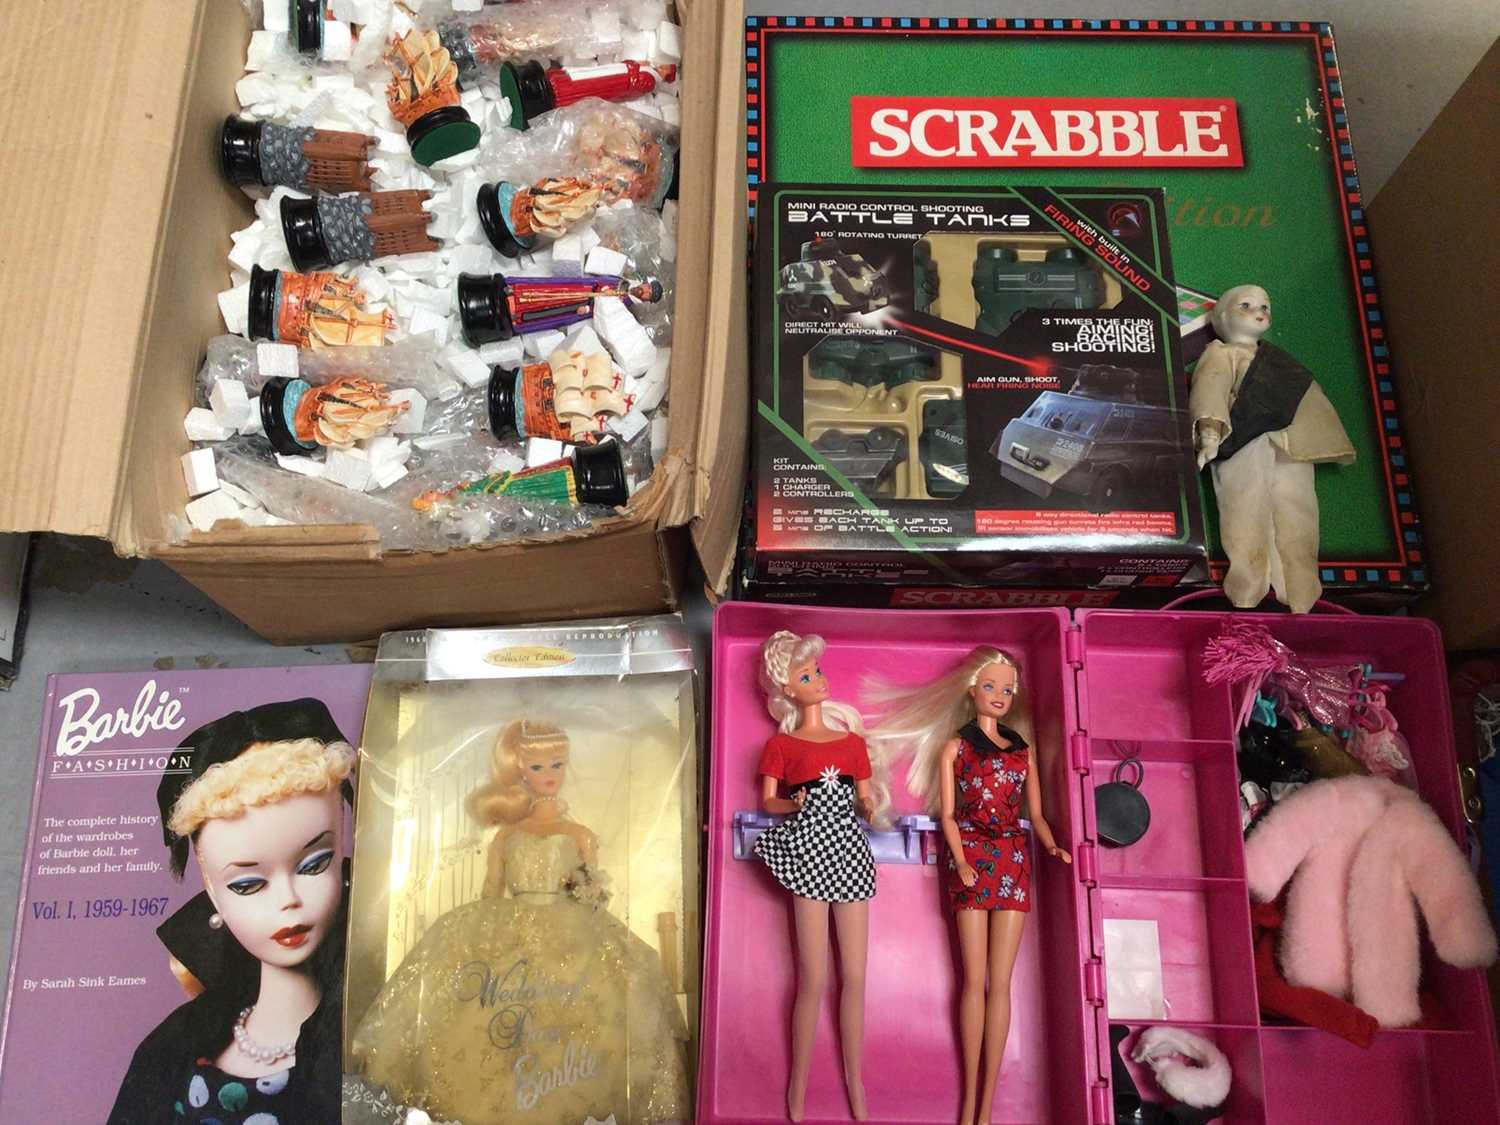 Novelty chess set, other games, vintage and later Barbies with accessories, small snooker table, ten